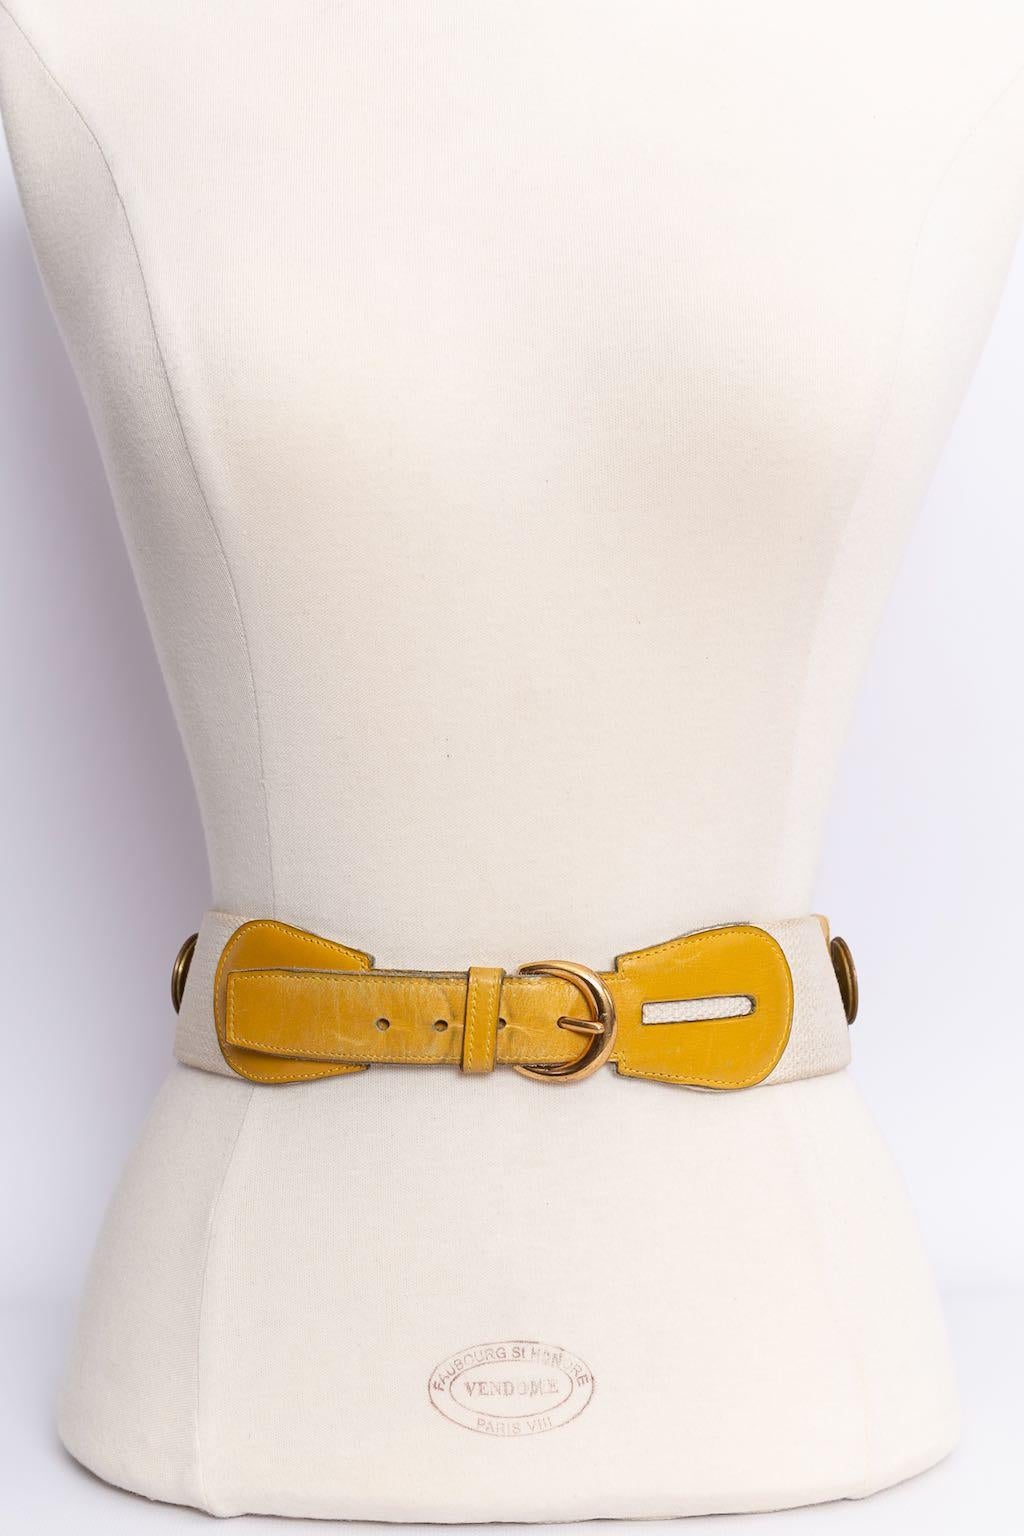 Hermes Paris Canvas Belt in Yellow Leather, Adorned with Gilted Metal Elements For Sale 1